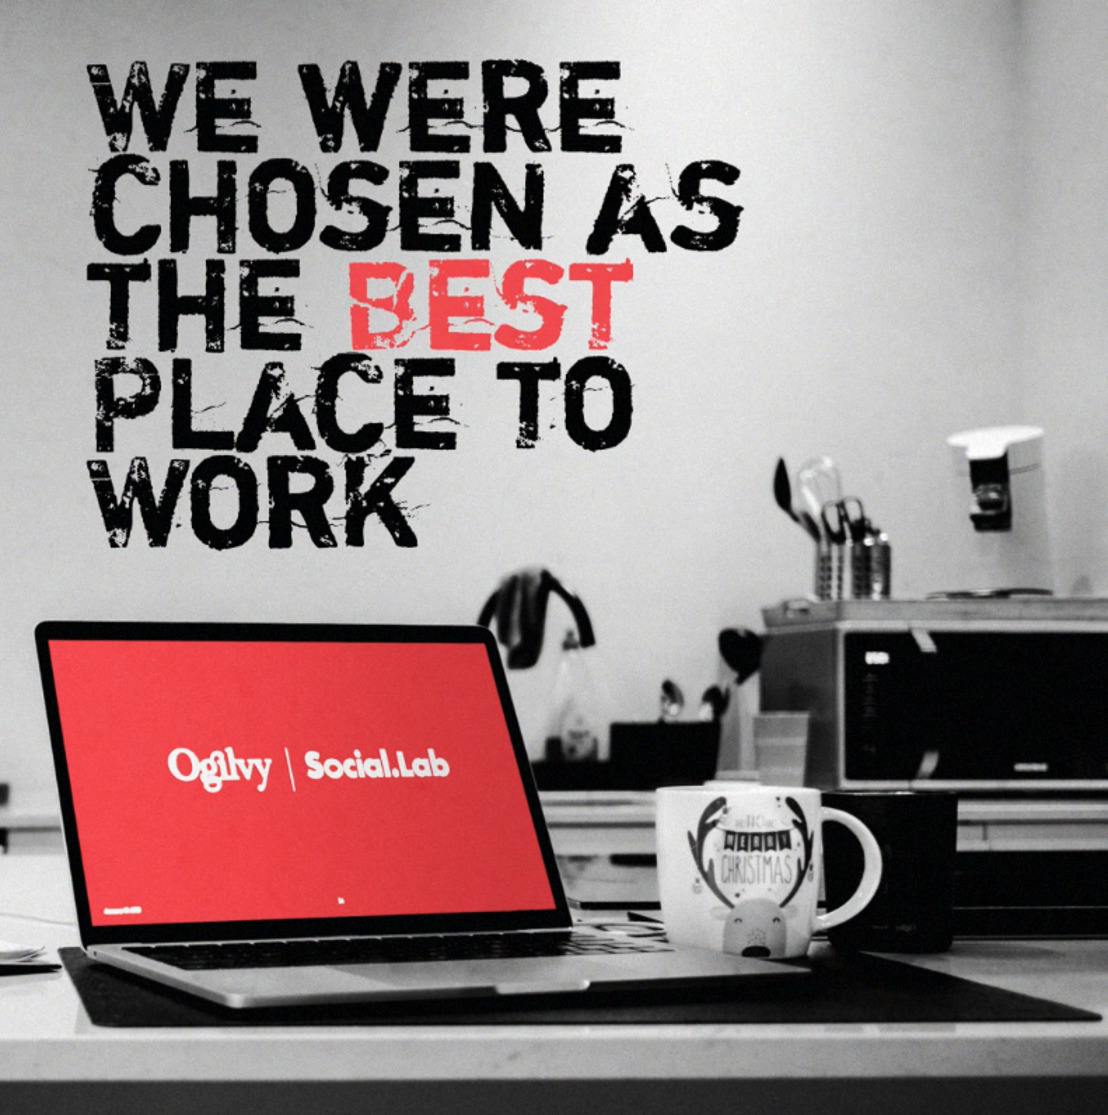 Ogilvy Social.Lab is “Best Place to Work”